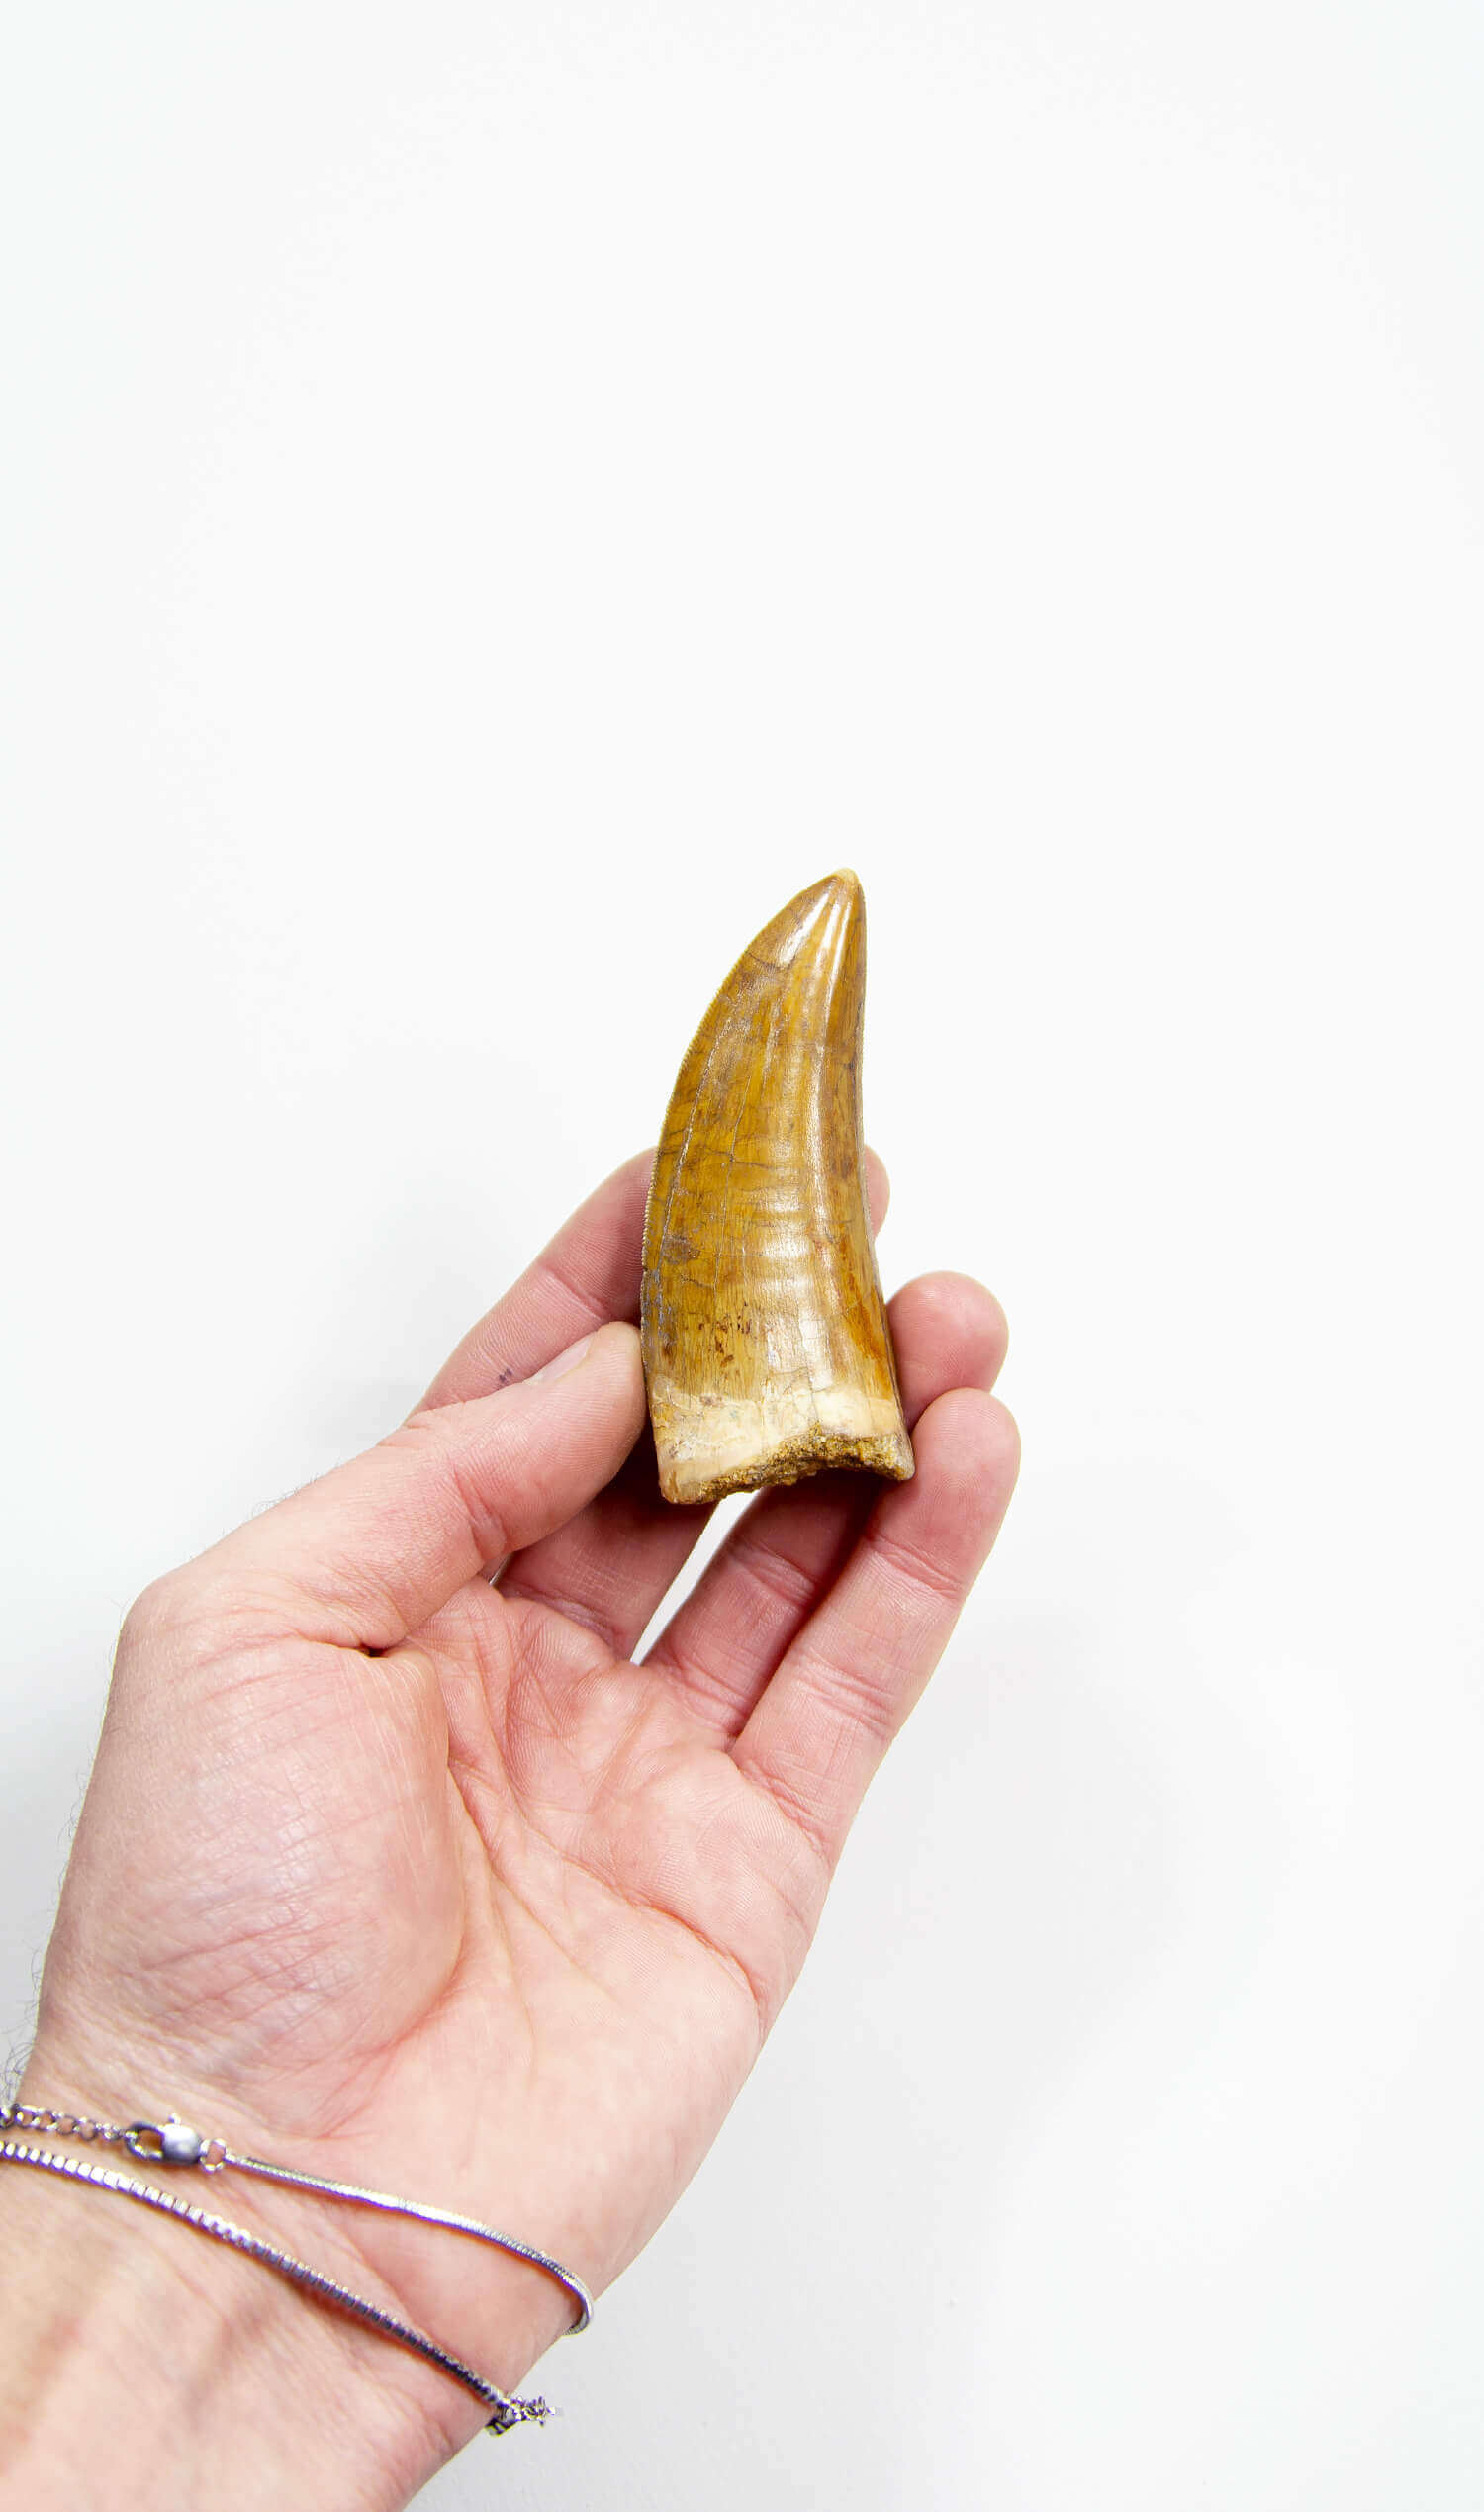 real fossil dinosaur carcharodontosaurus tooth for sale at the uk fossil store 70